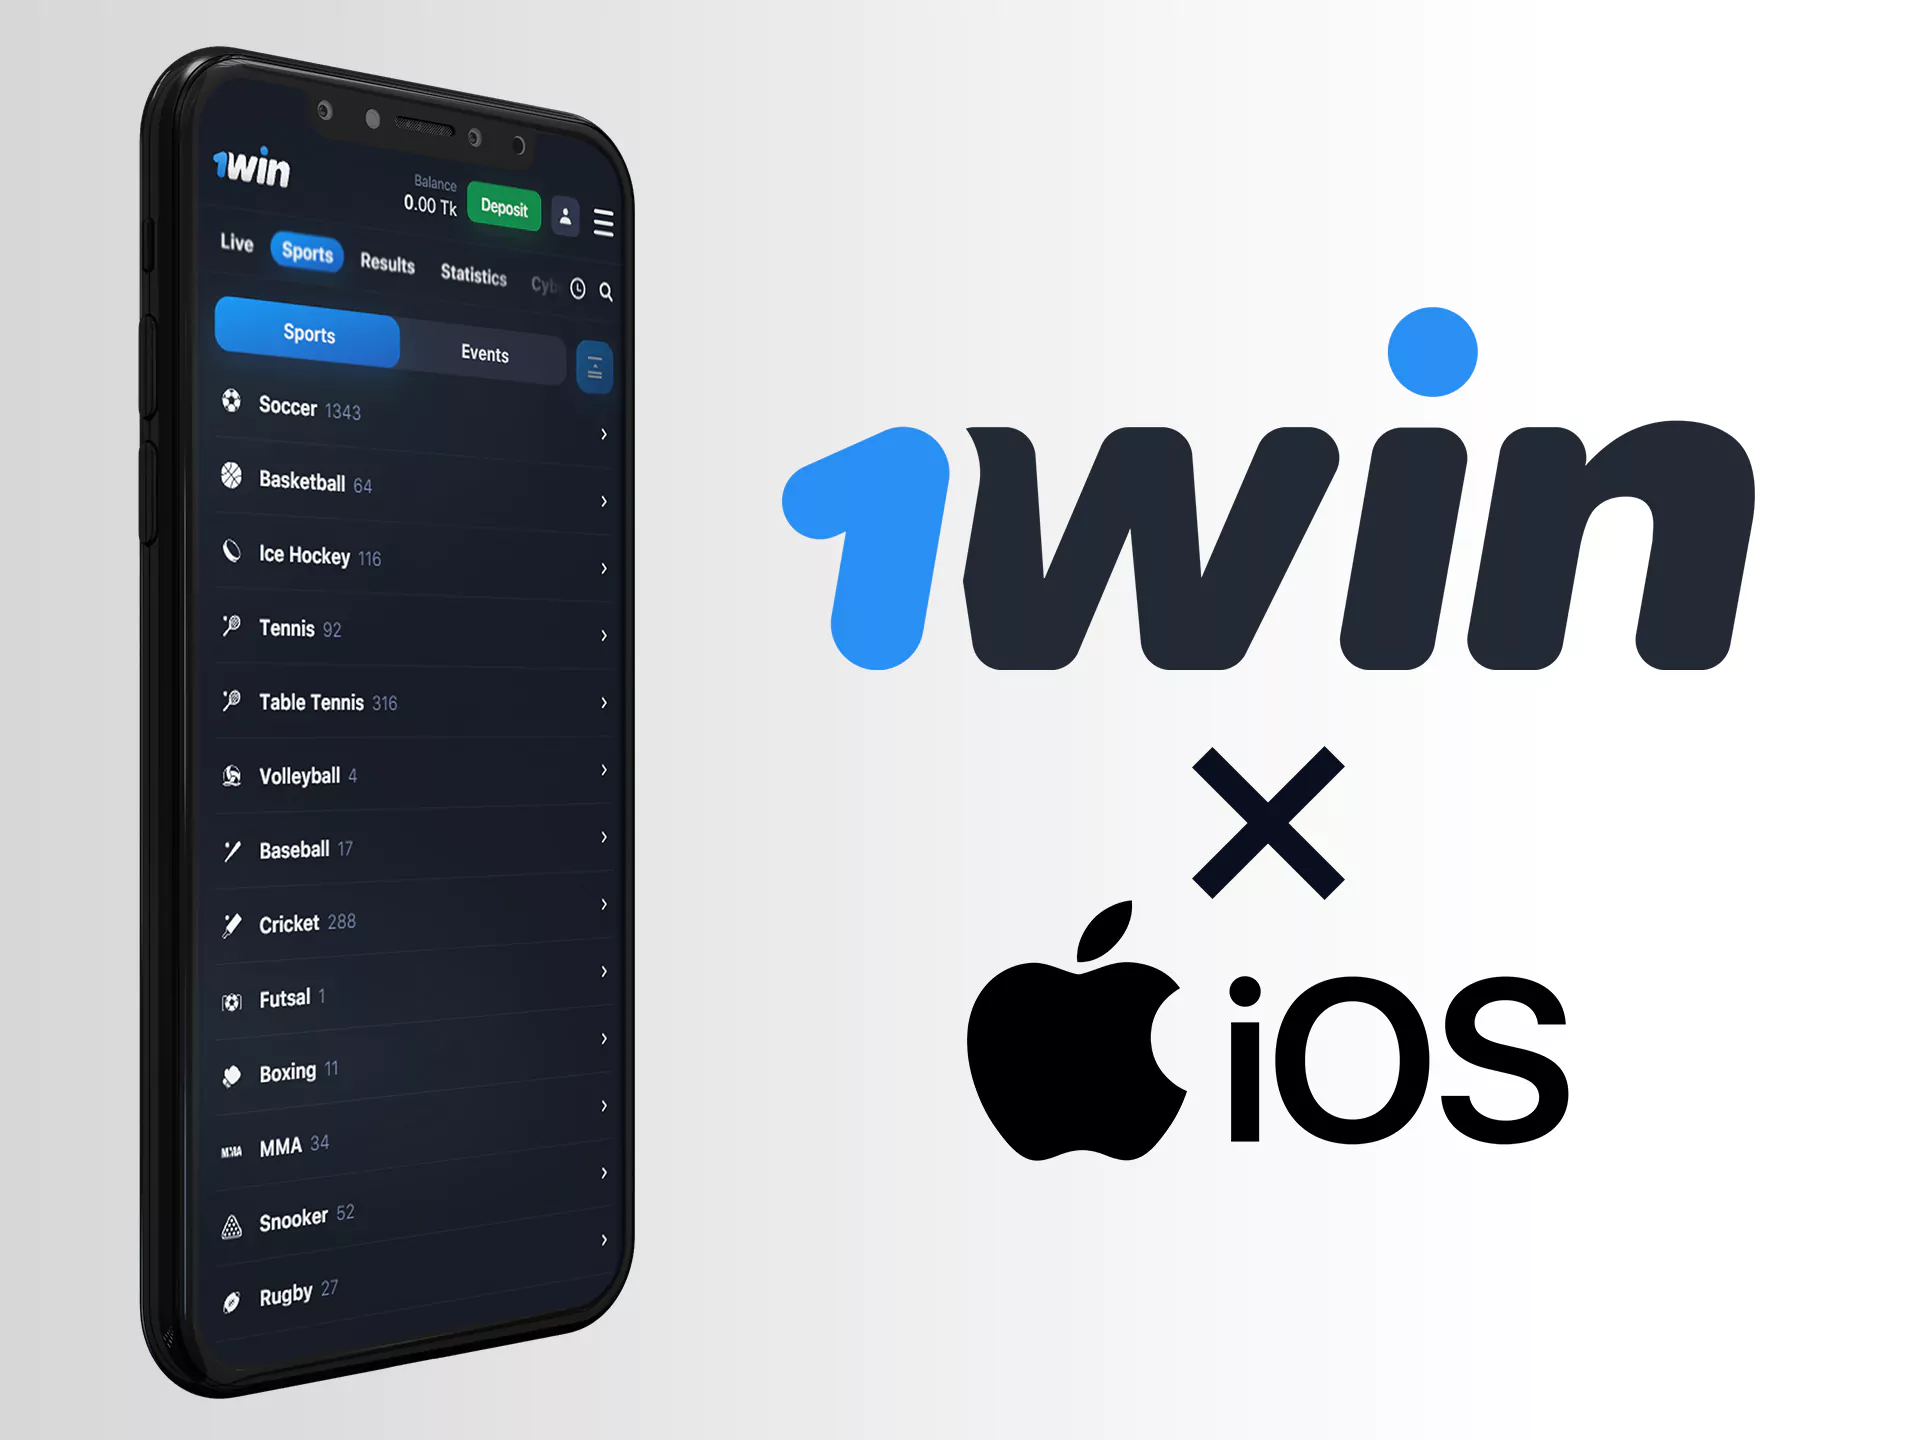 Install the 1win app on any of your iOS devices.